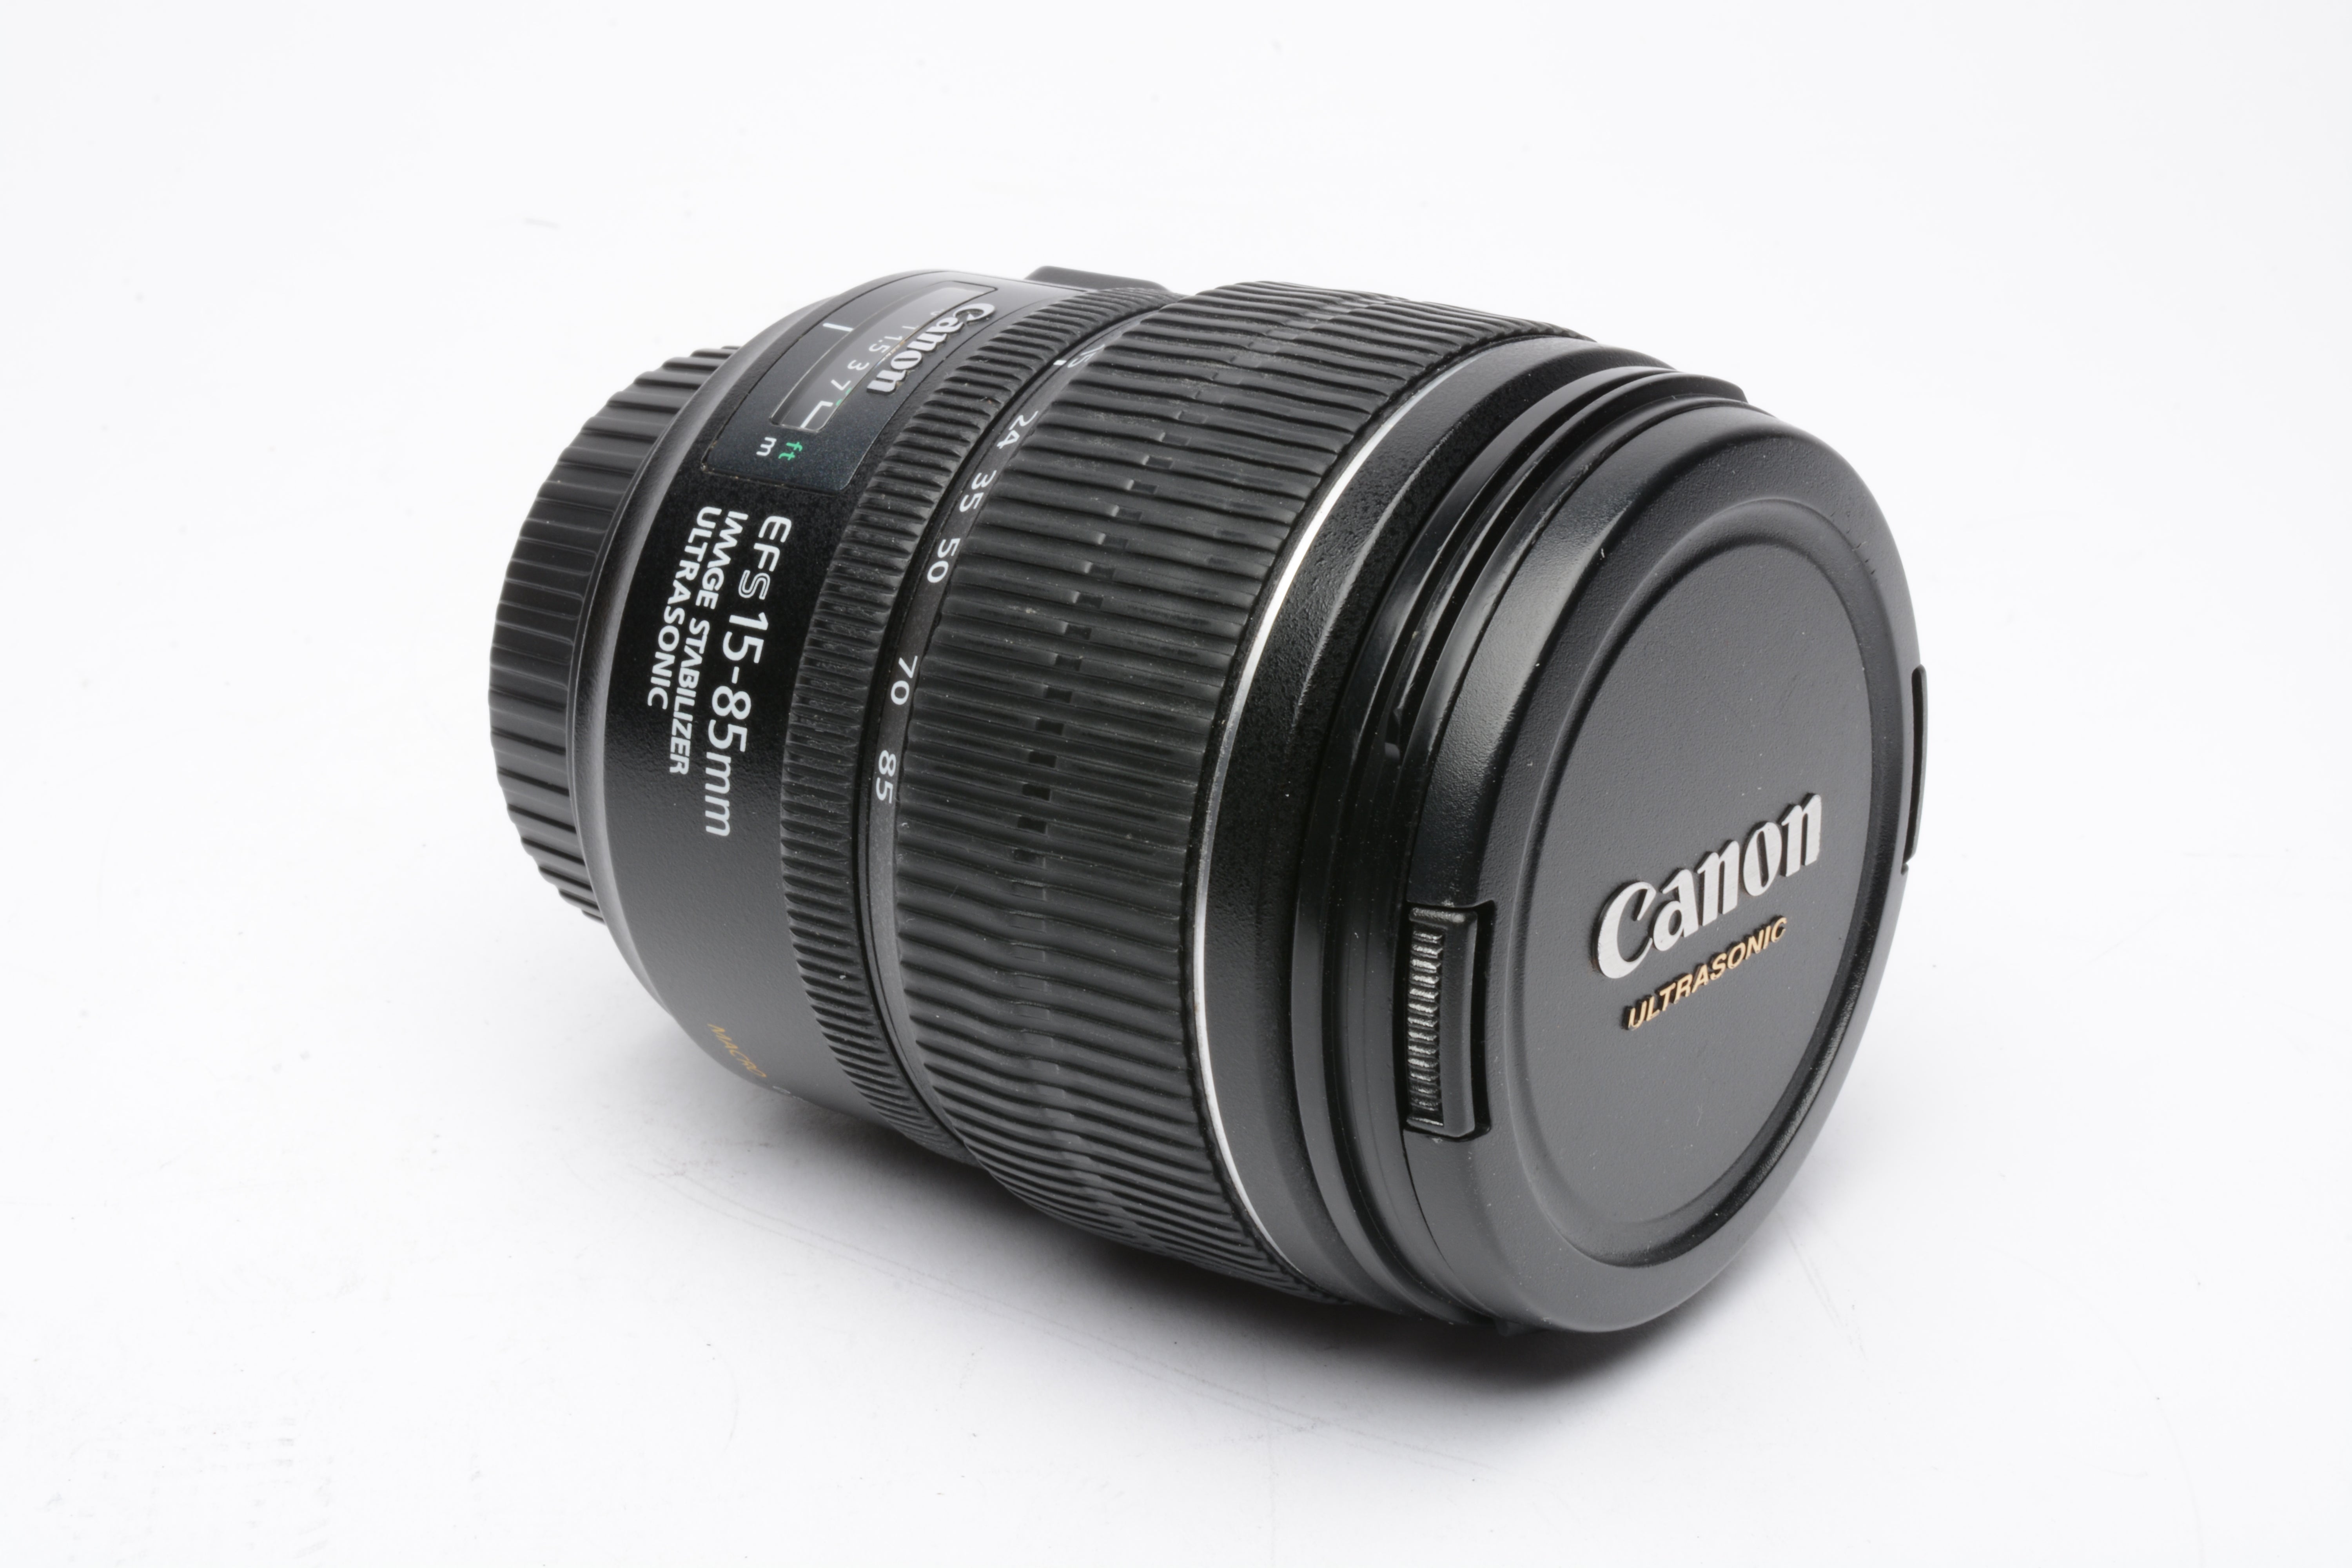 Canon EFS 15-85mm f3.5-5.6 IS USM zoom lens, caps, nice & clean ...